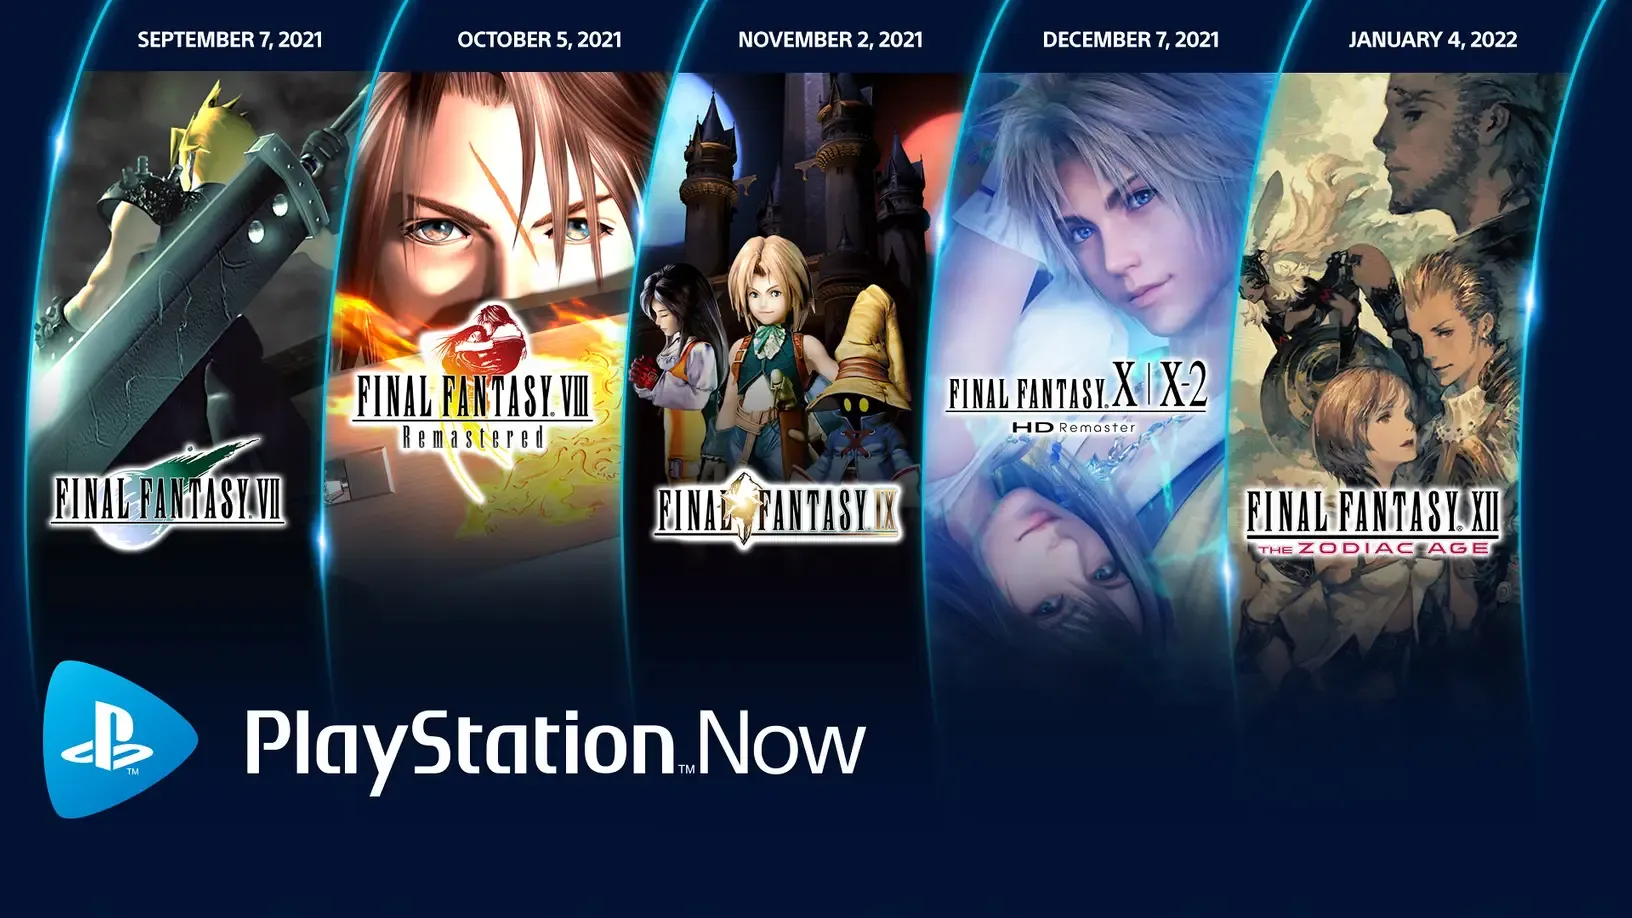 ps now promo image of final fantasy titles coming this year